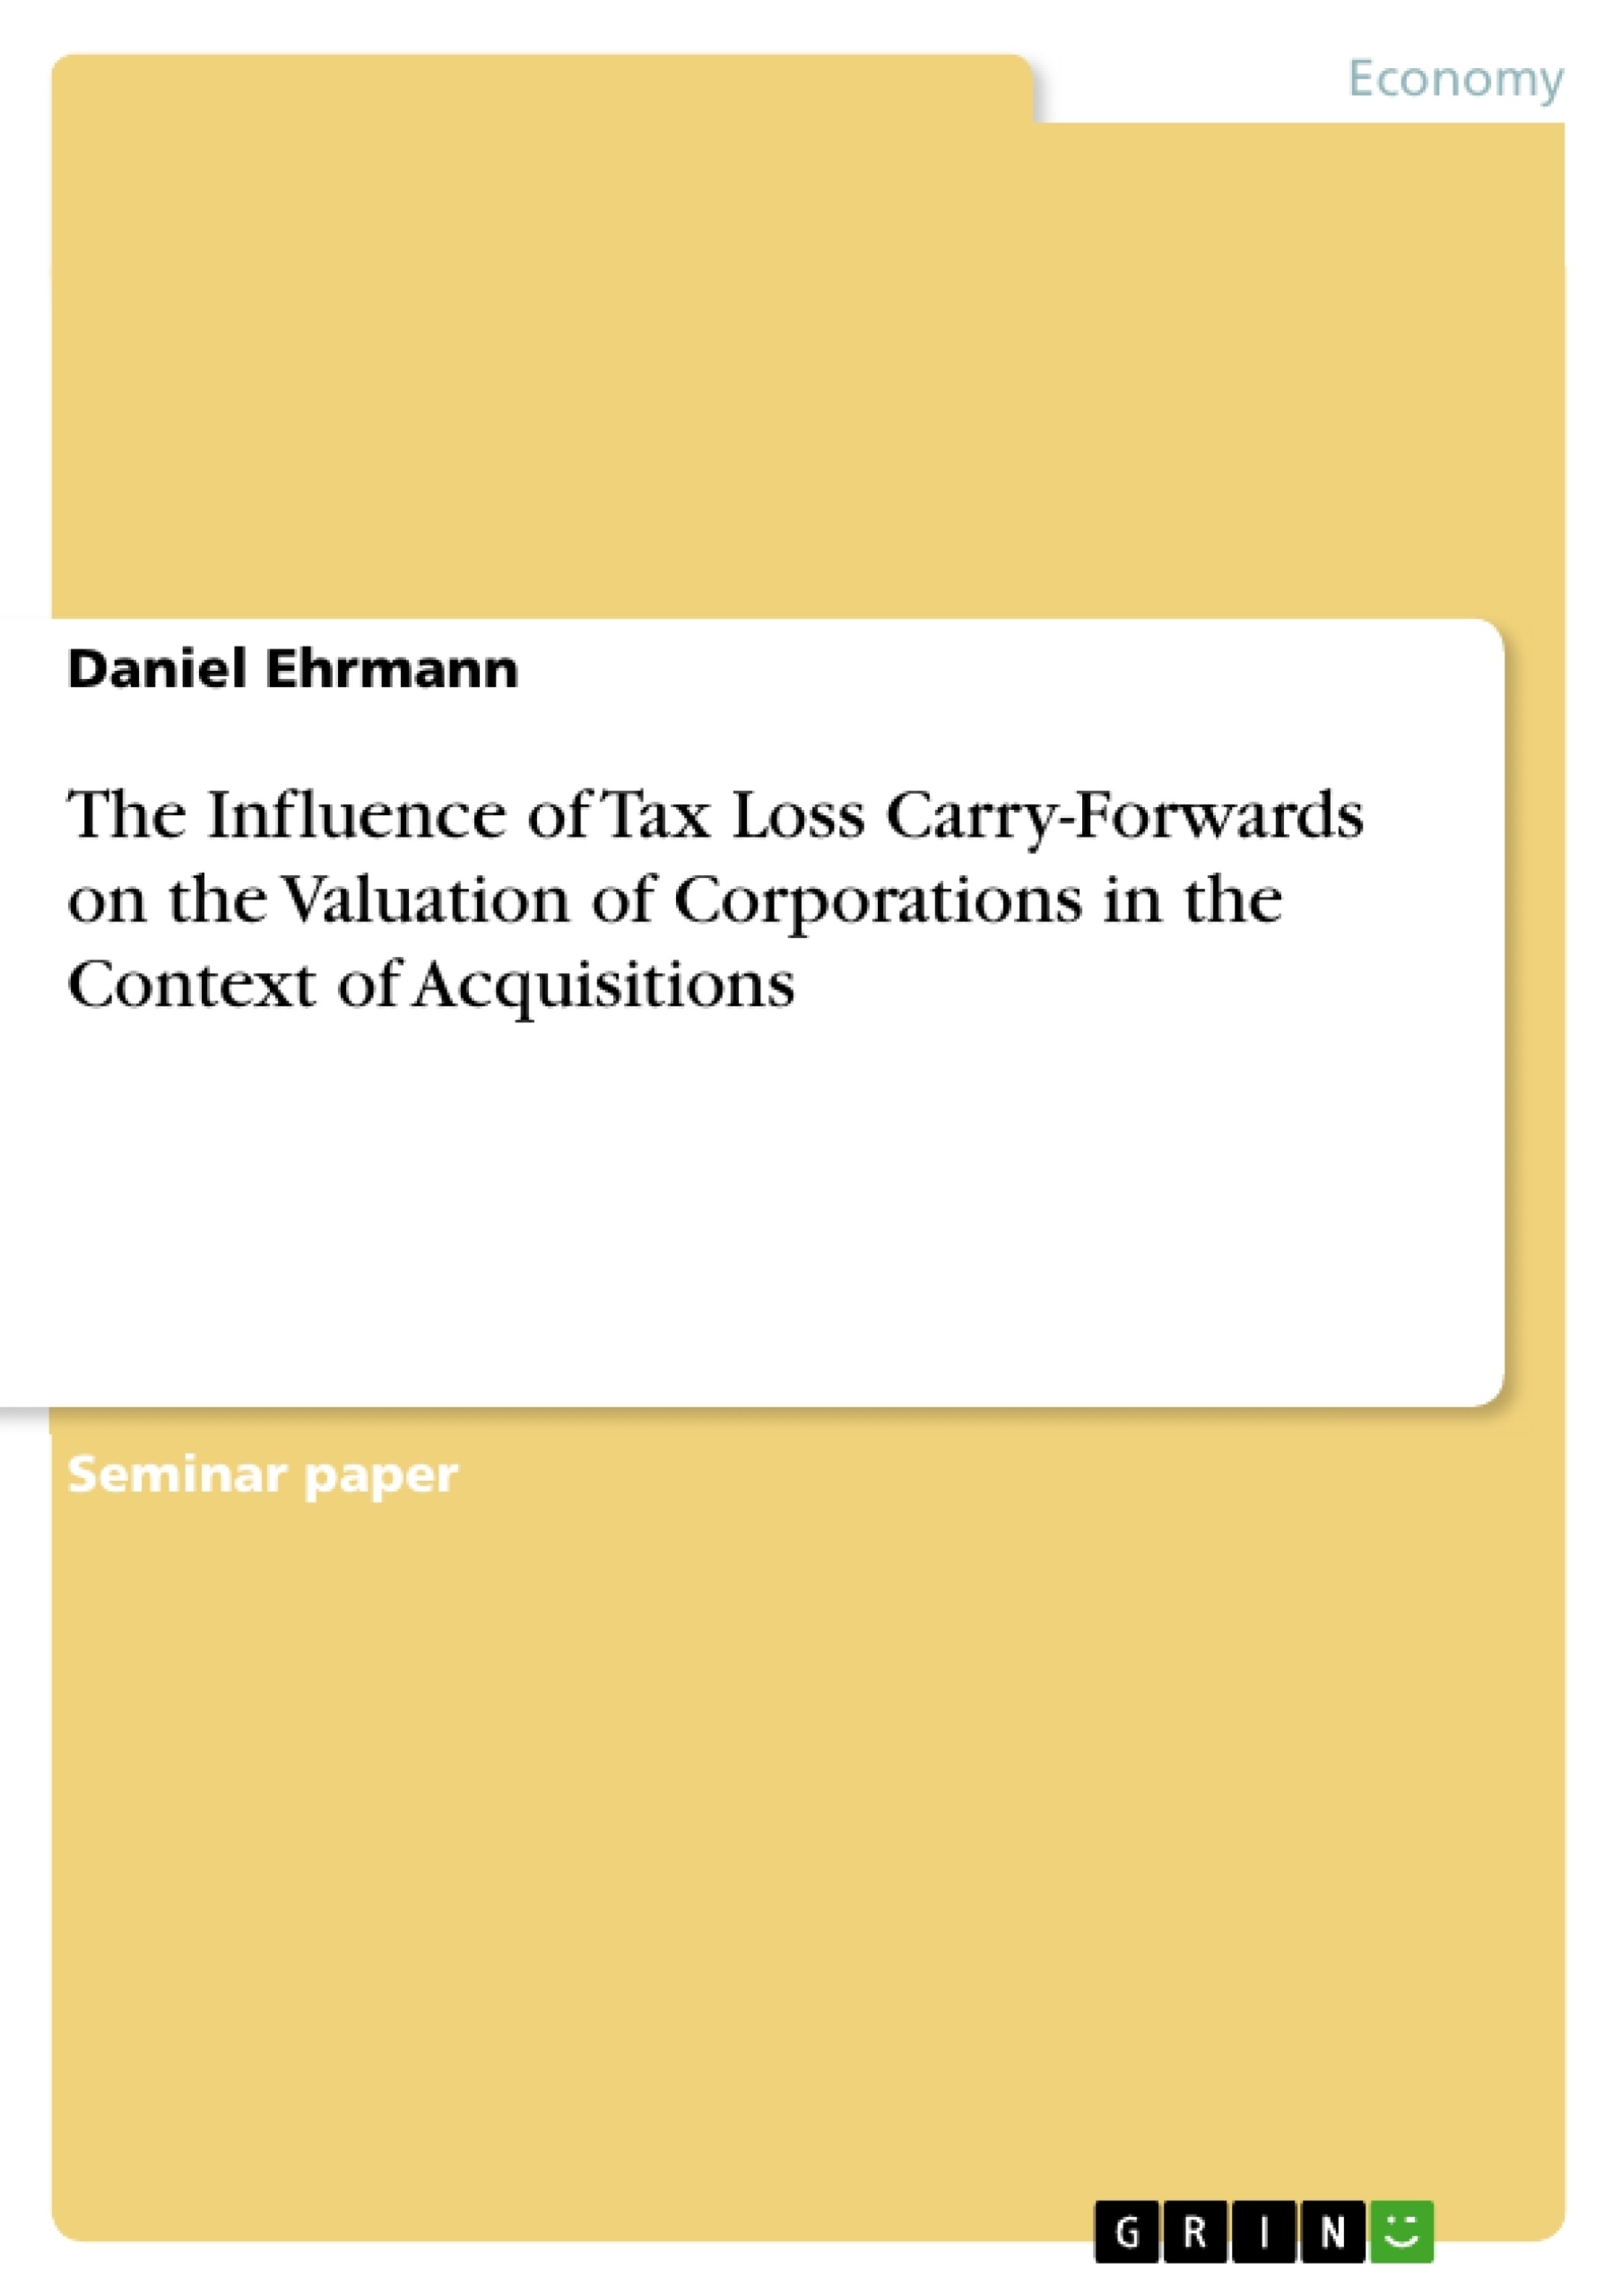 Titre: The Influence of Tax Loss Carry-Forwards on the Valuation of Corporations in the Context of Acquisitions